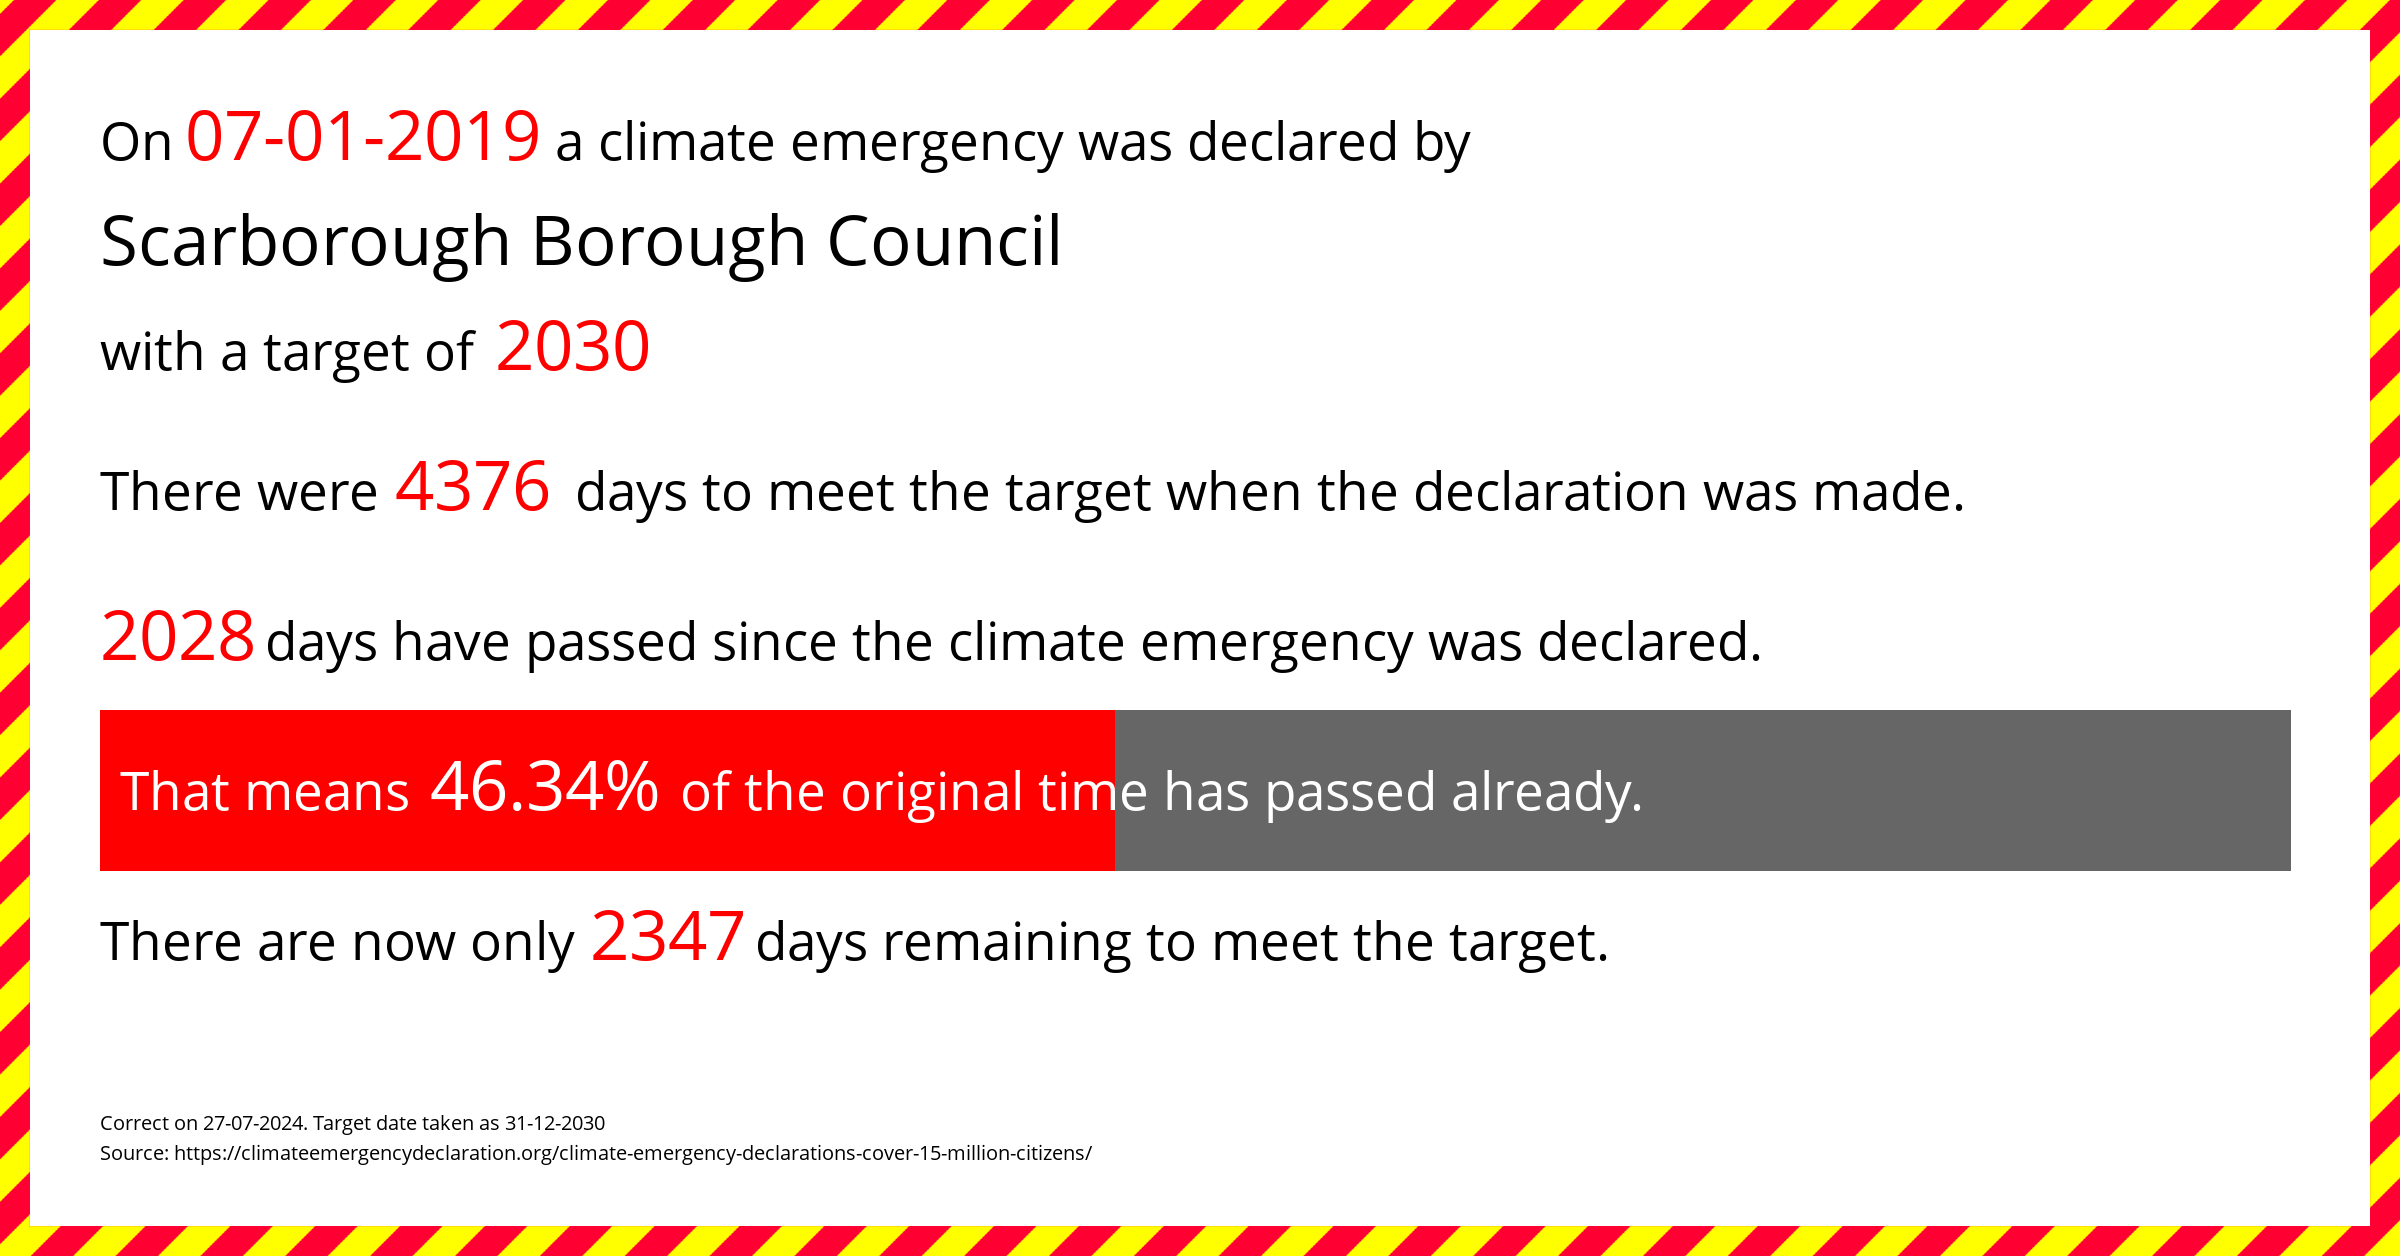 Scarborough Borough Council declared a Climate emergency on Monday 7th January 2019, with a target of 2030.